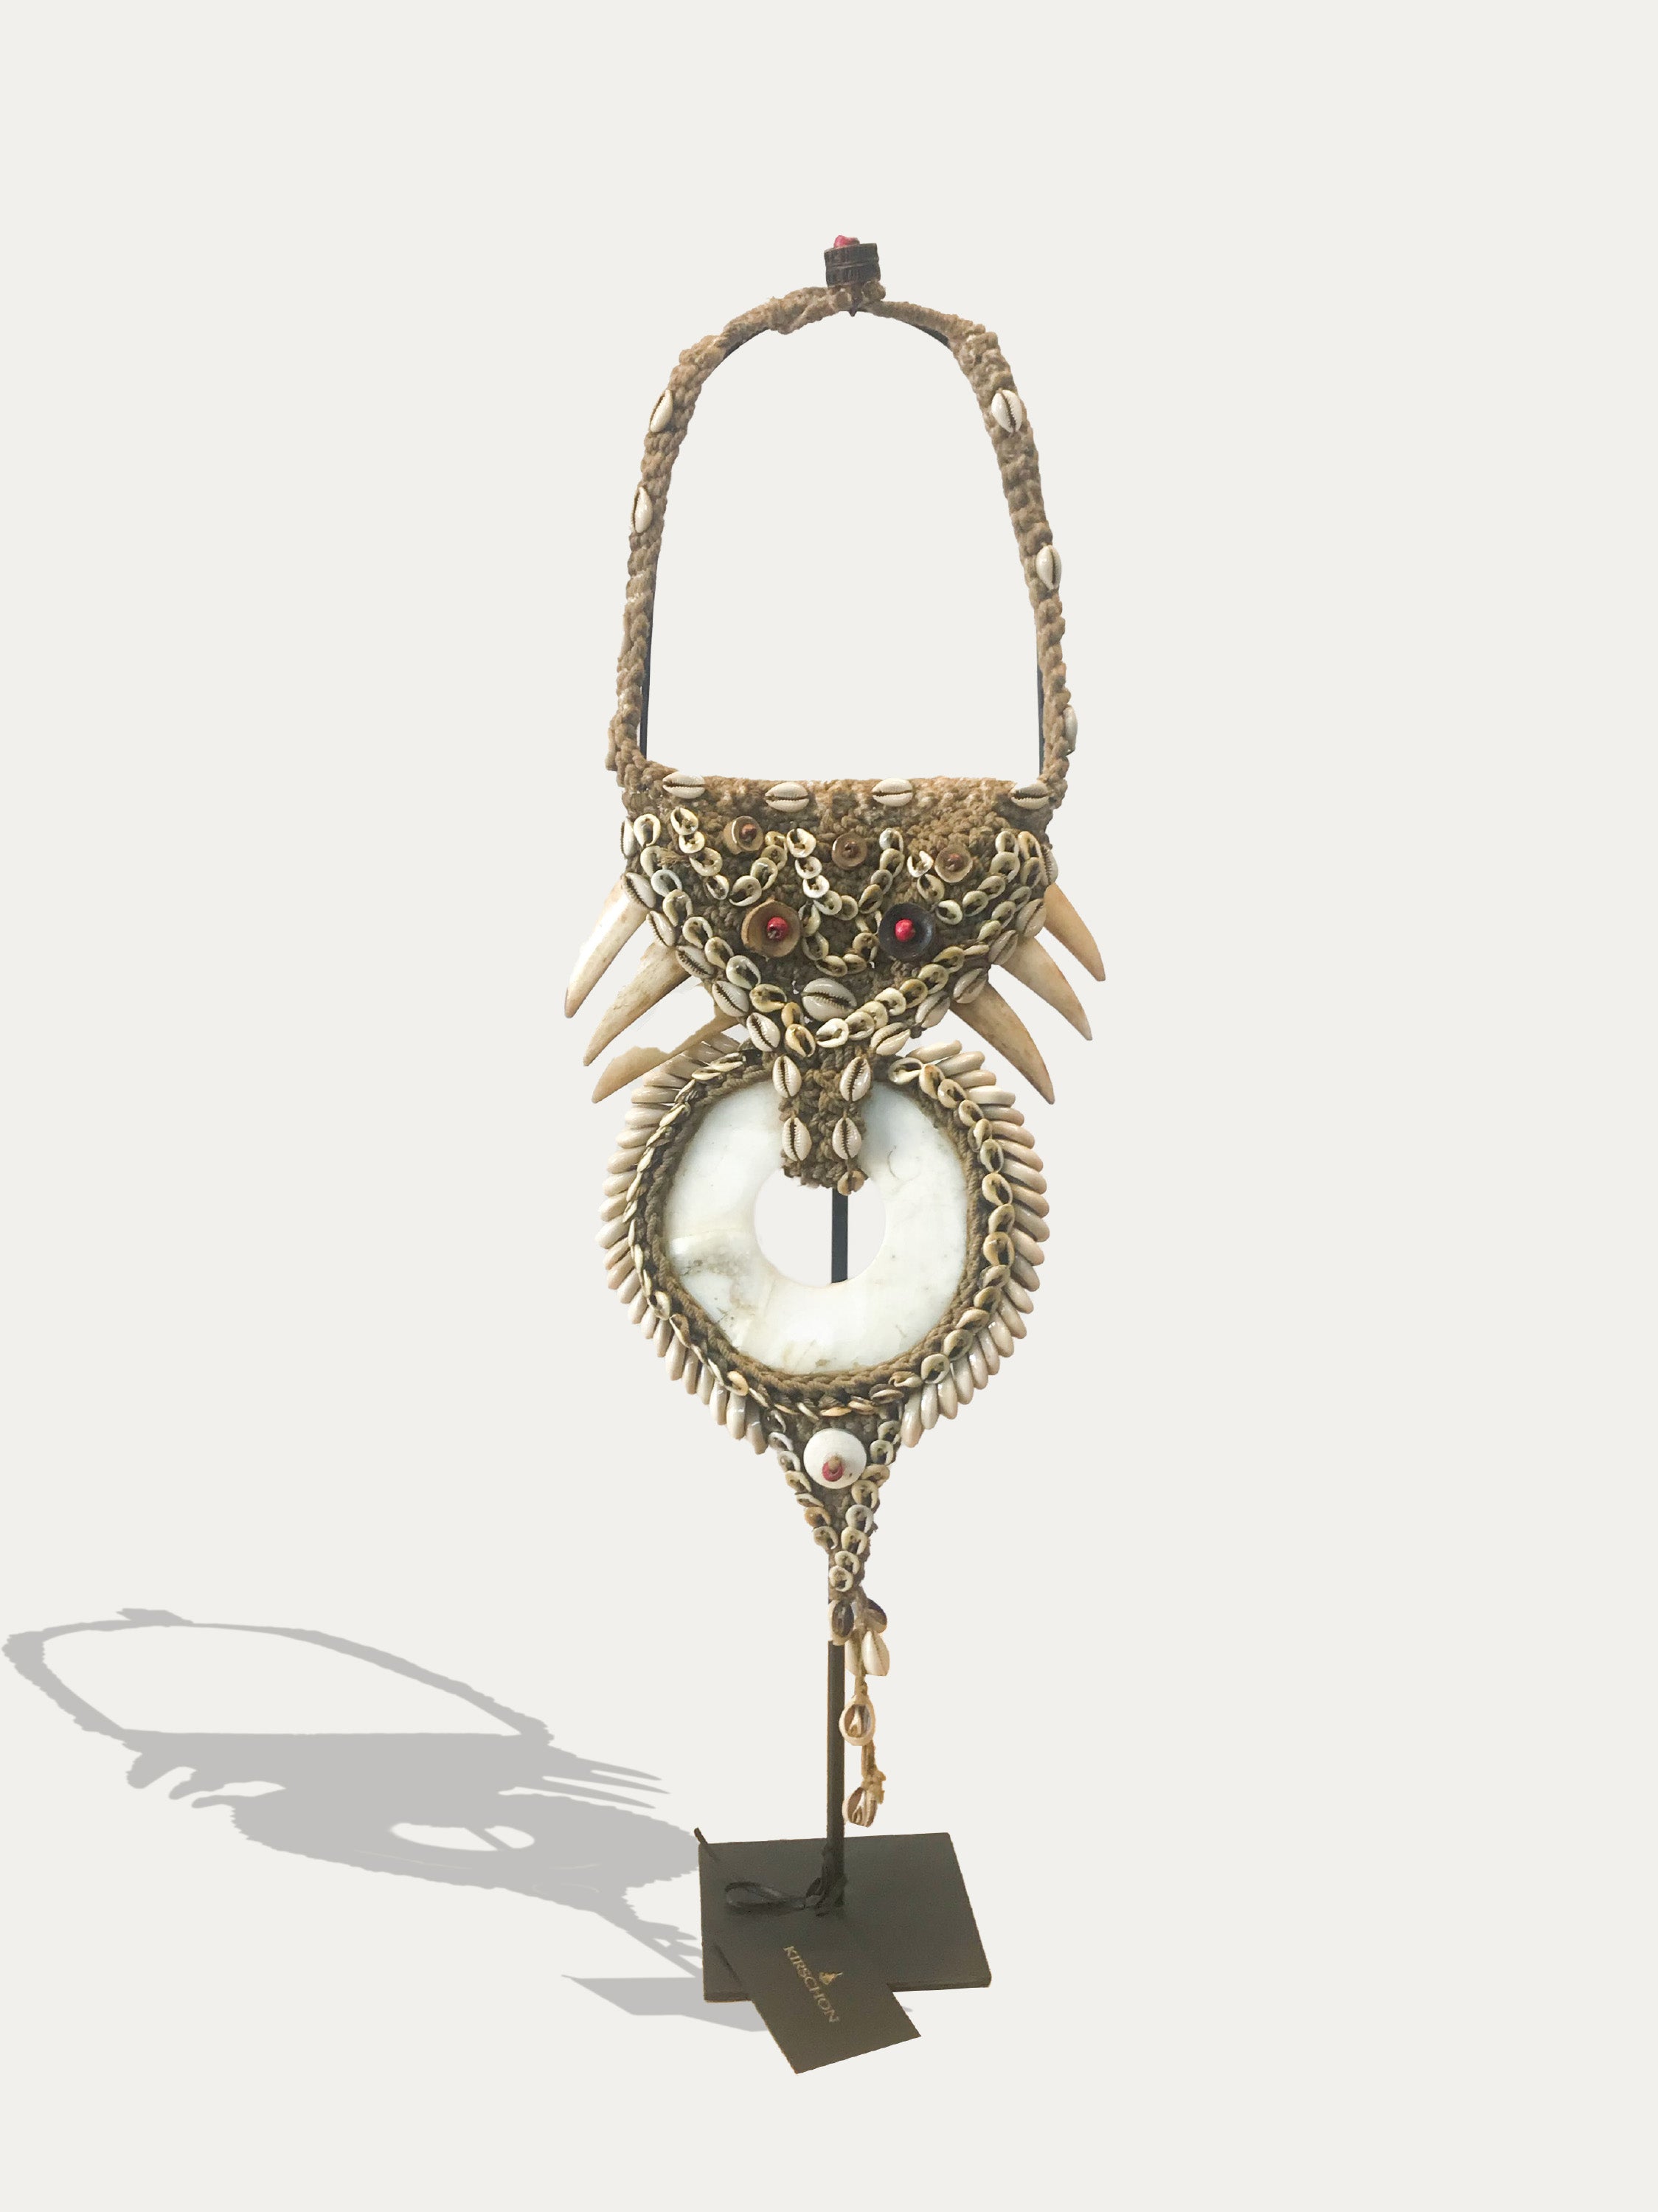 Ceremonial Shell Necklace From Papua